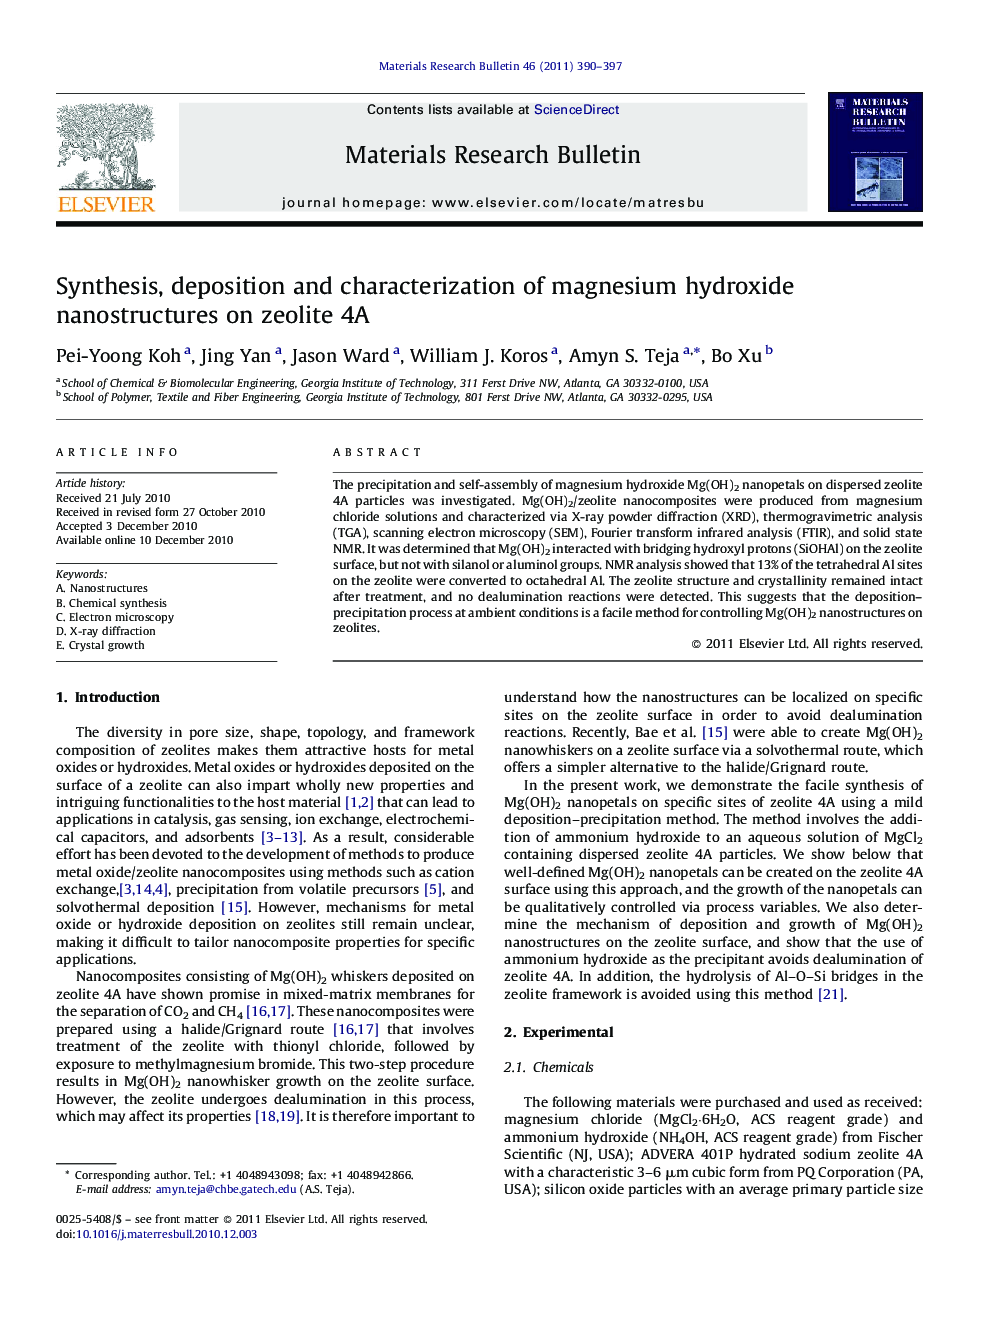 Synthesis, deposition and characterization of magnesium hydroxide nanostructures on zeolite 4A